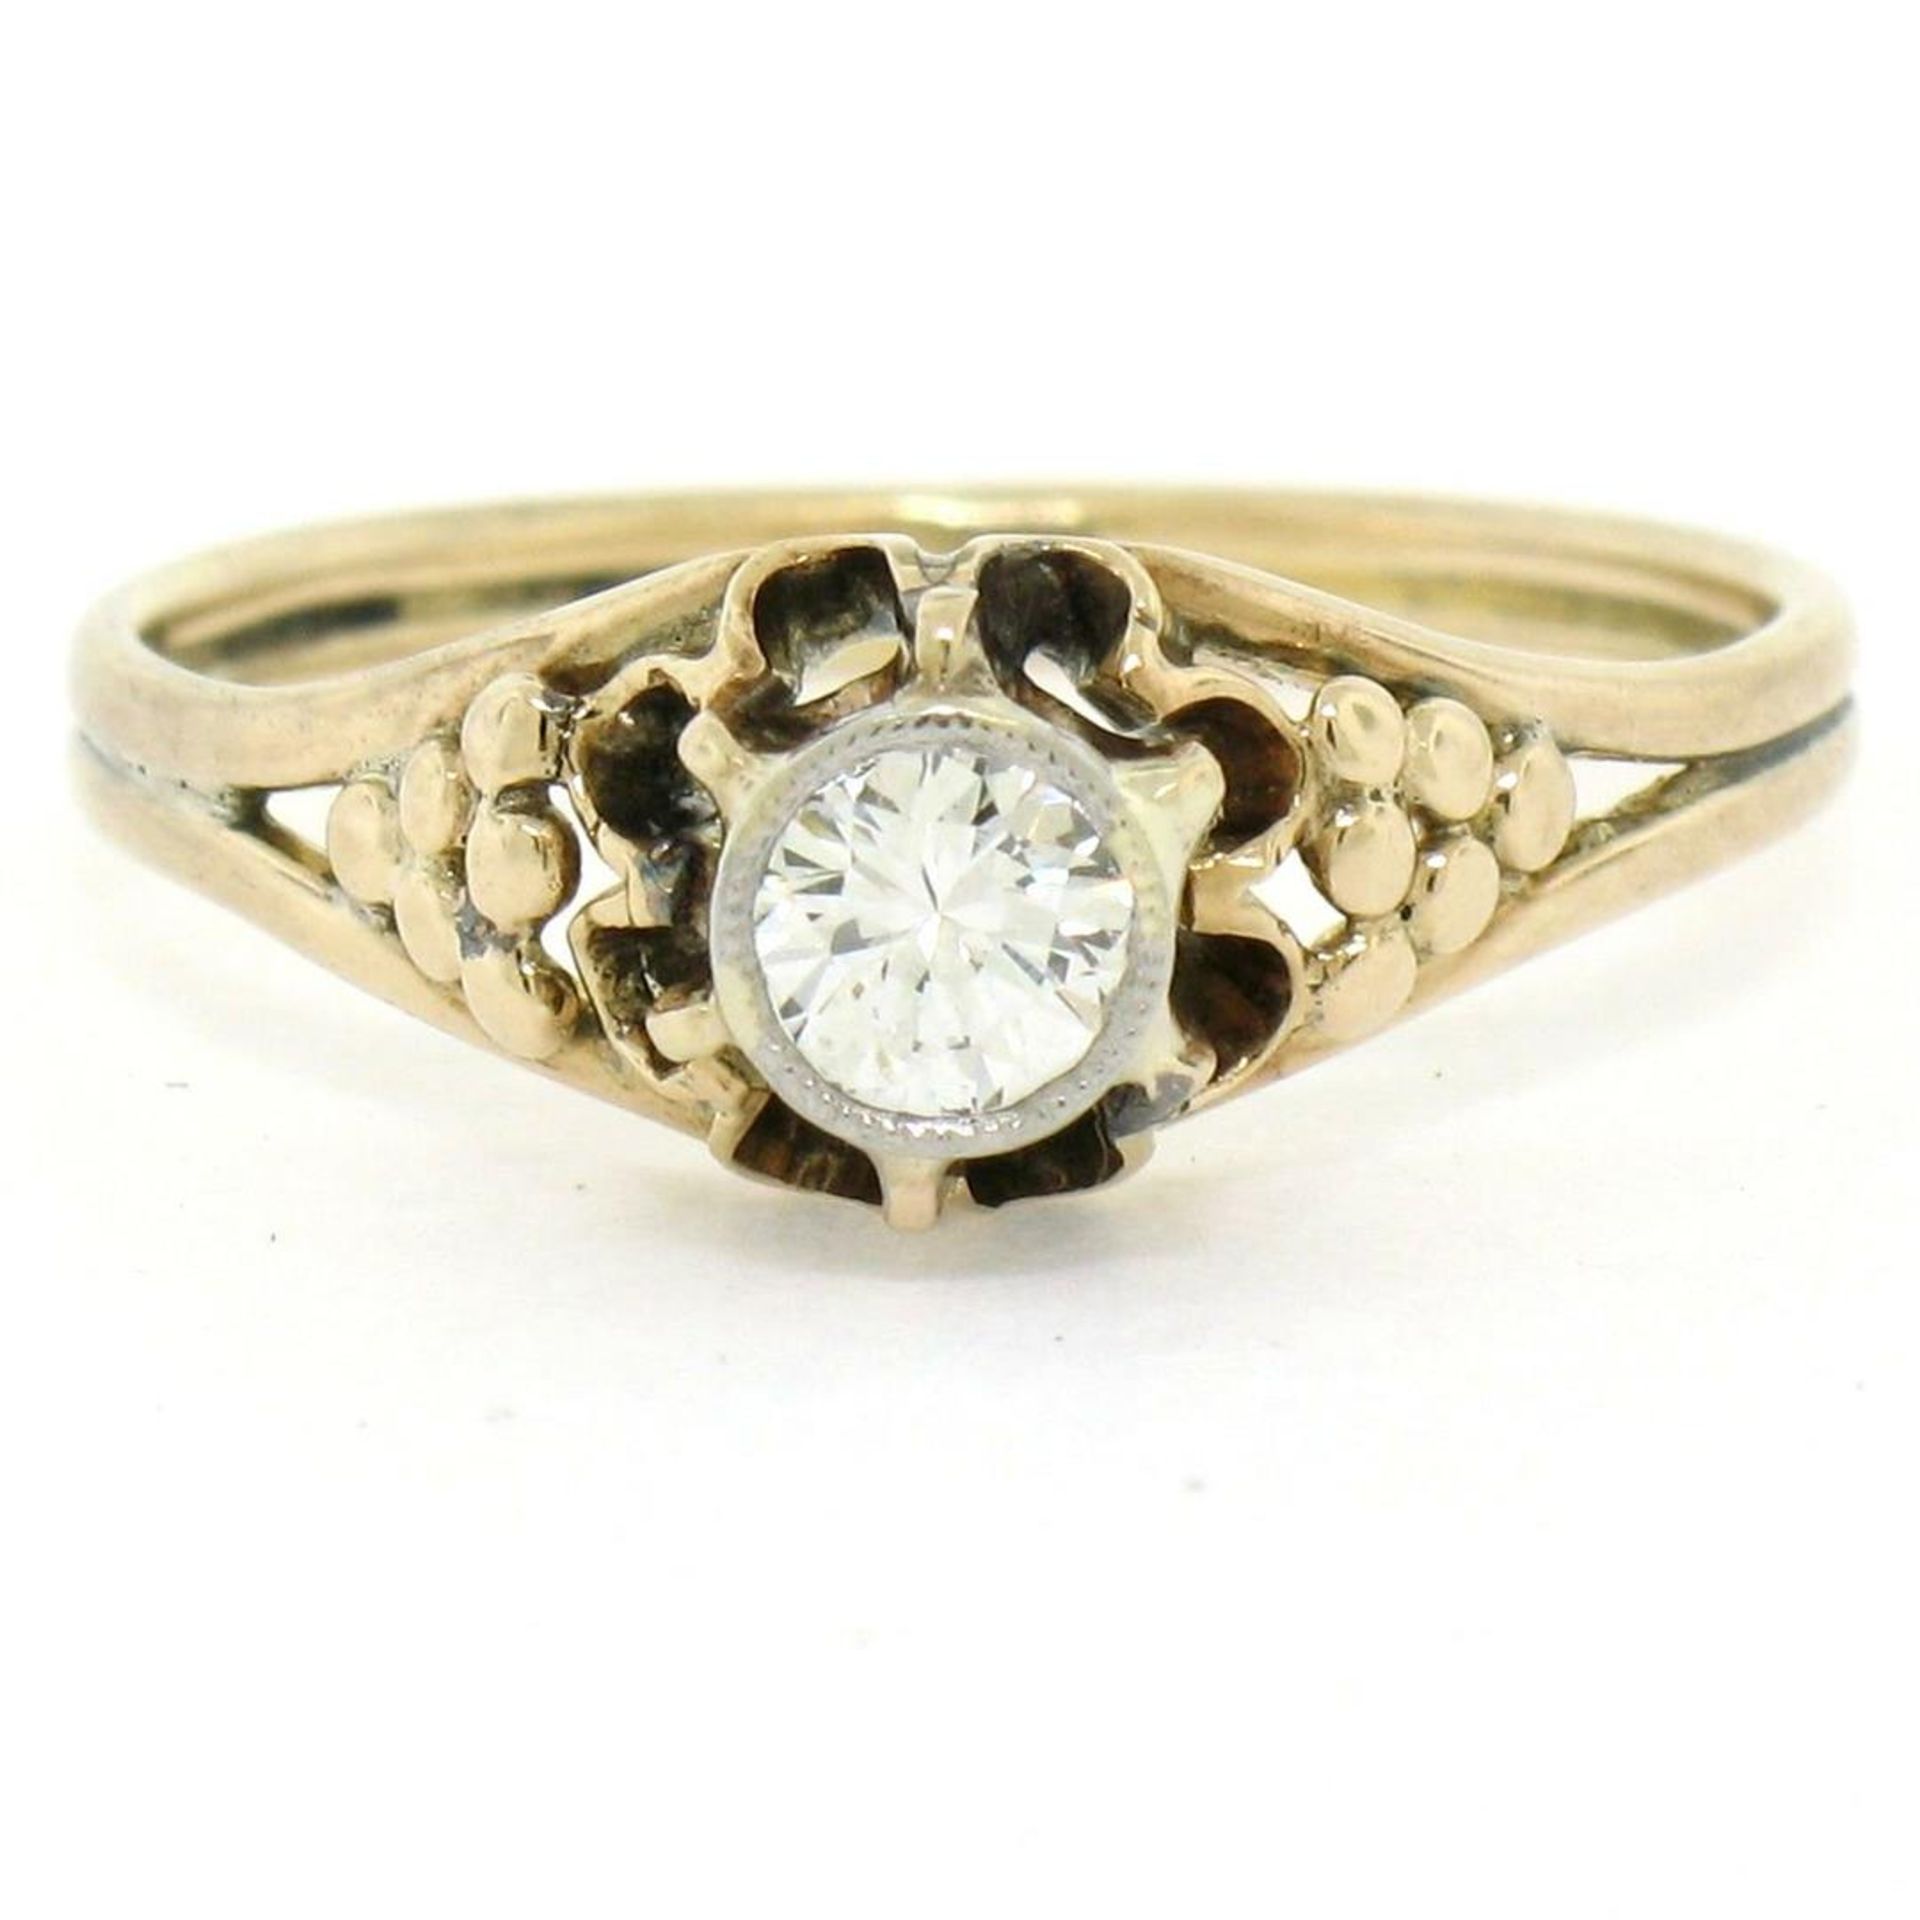 Antique 14kt Yellow and White Gold 0.30 ct Diamond Solitaire Ring